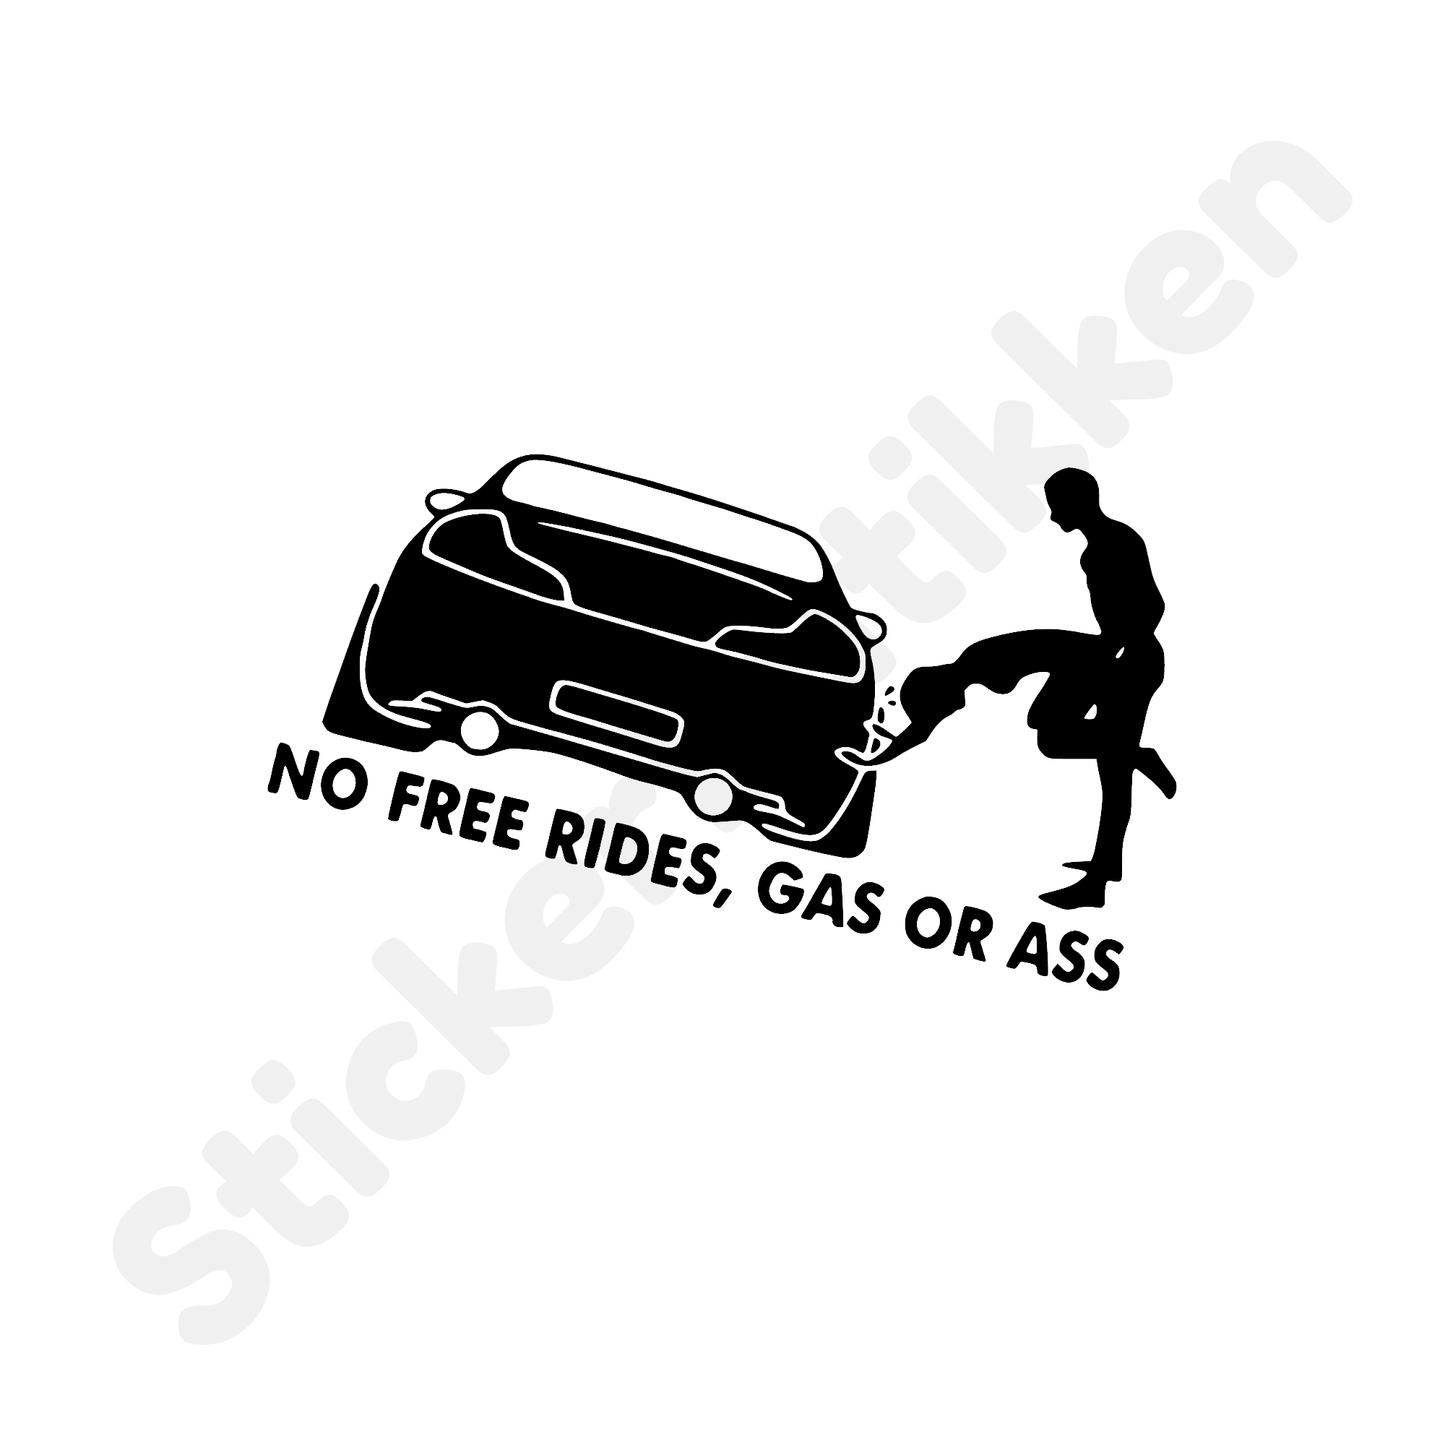 No free rides, gas or ass